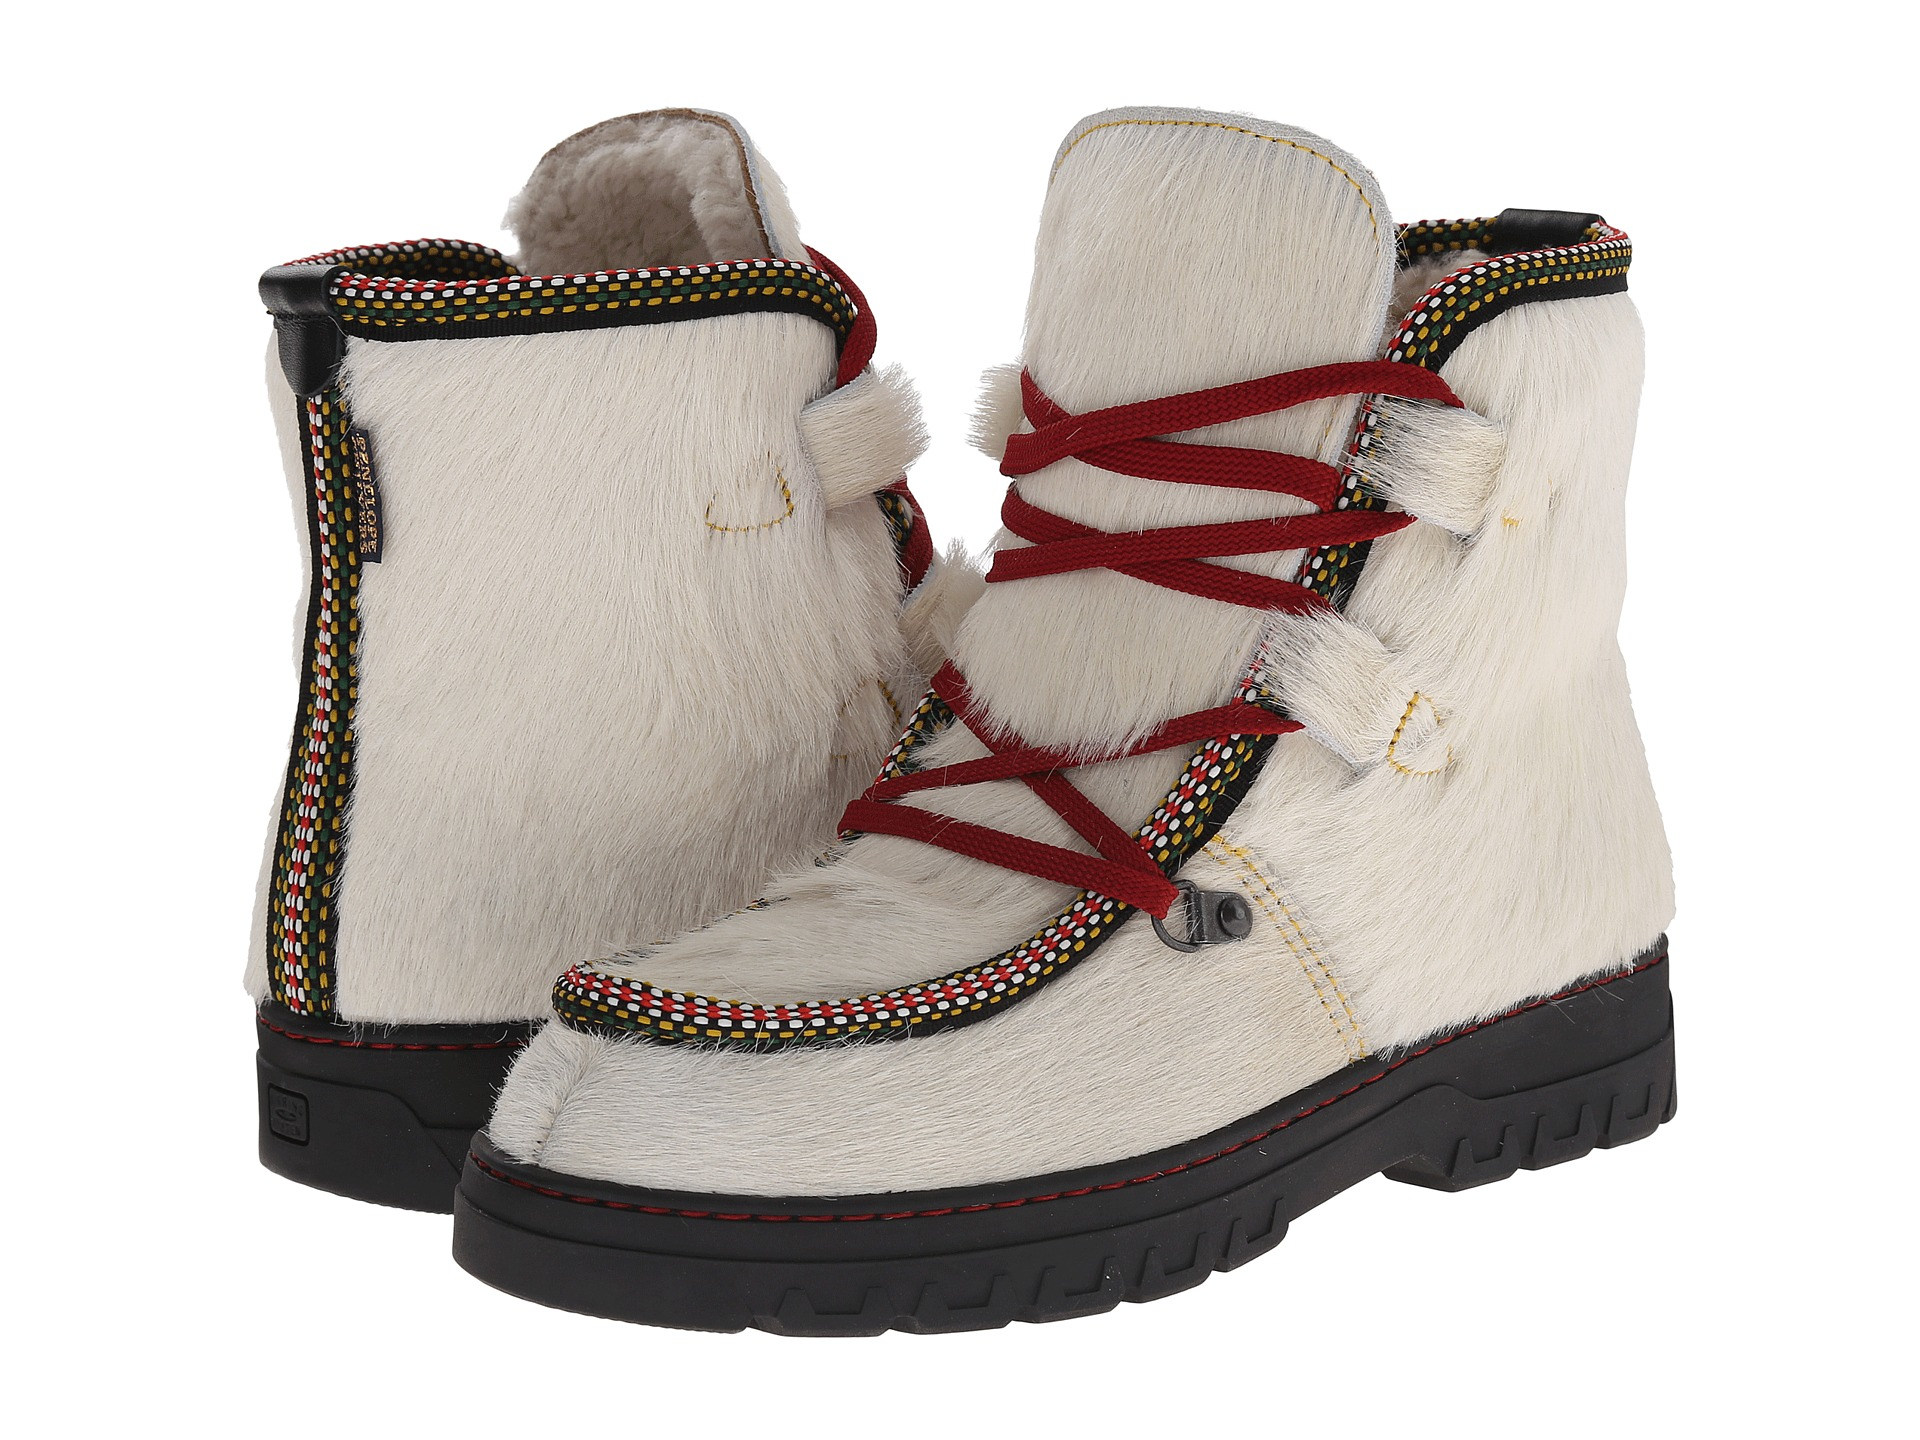 Lyst - Penelope Chilvers Incredible Boot in White